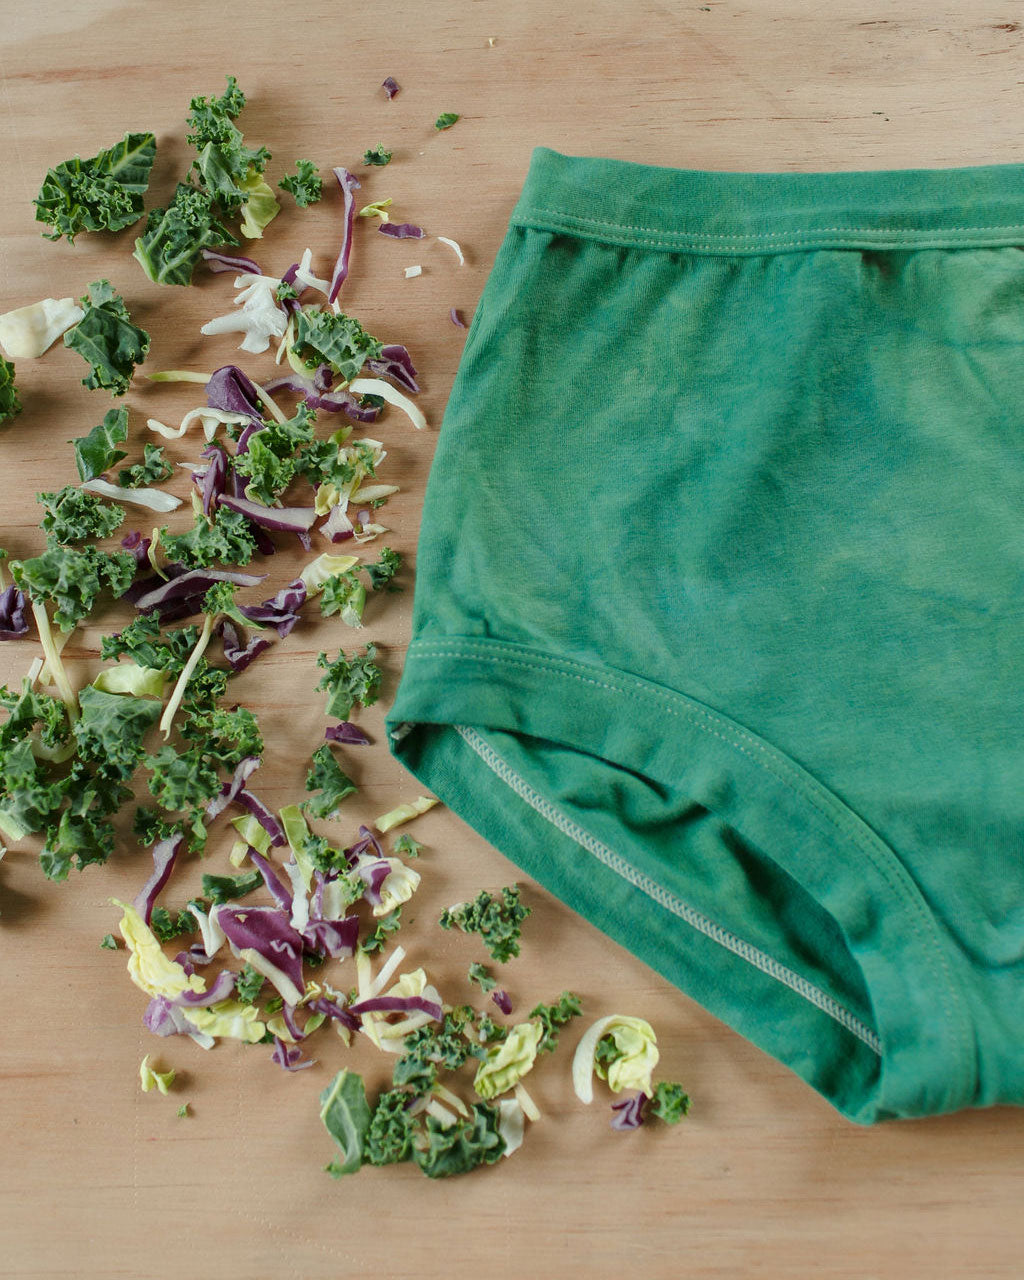 Flat lay of Thunderpants organic cotton Original style underwear in hand dye Emerald with kale around.